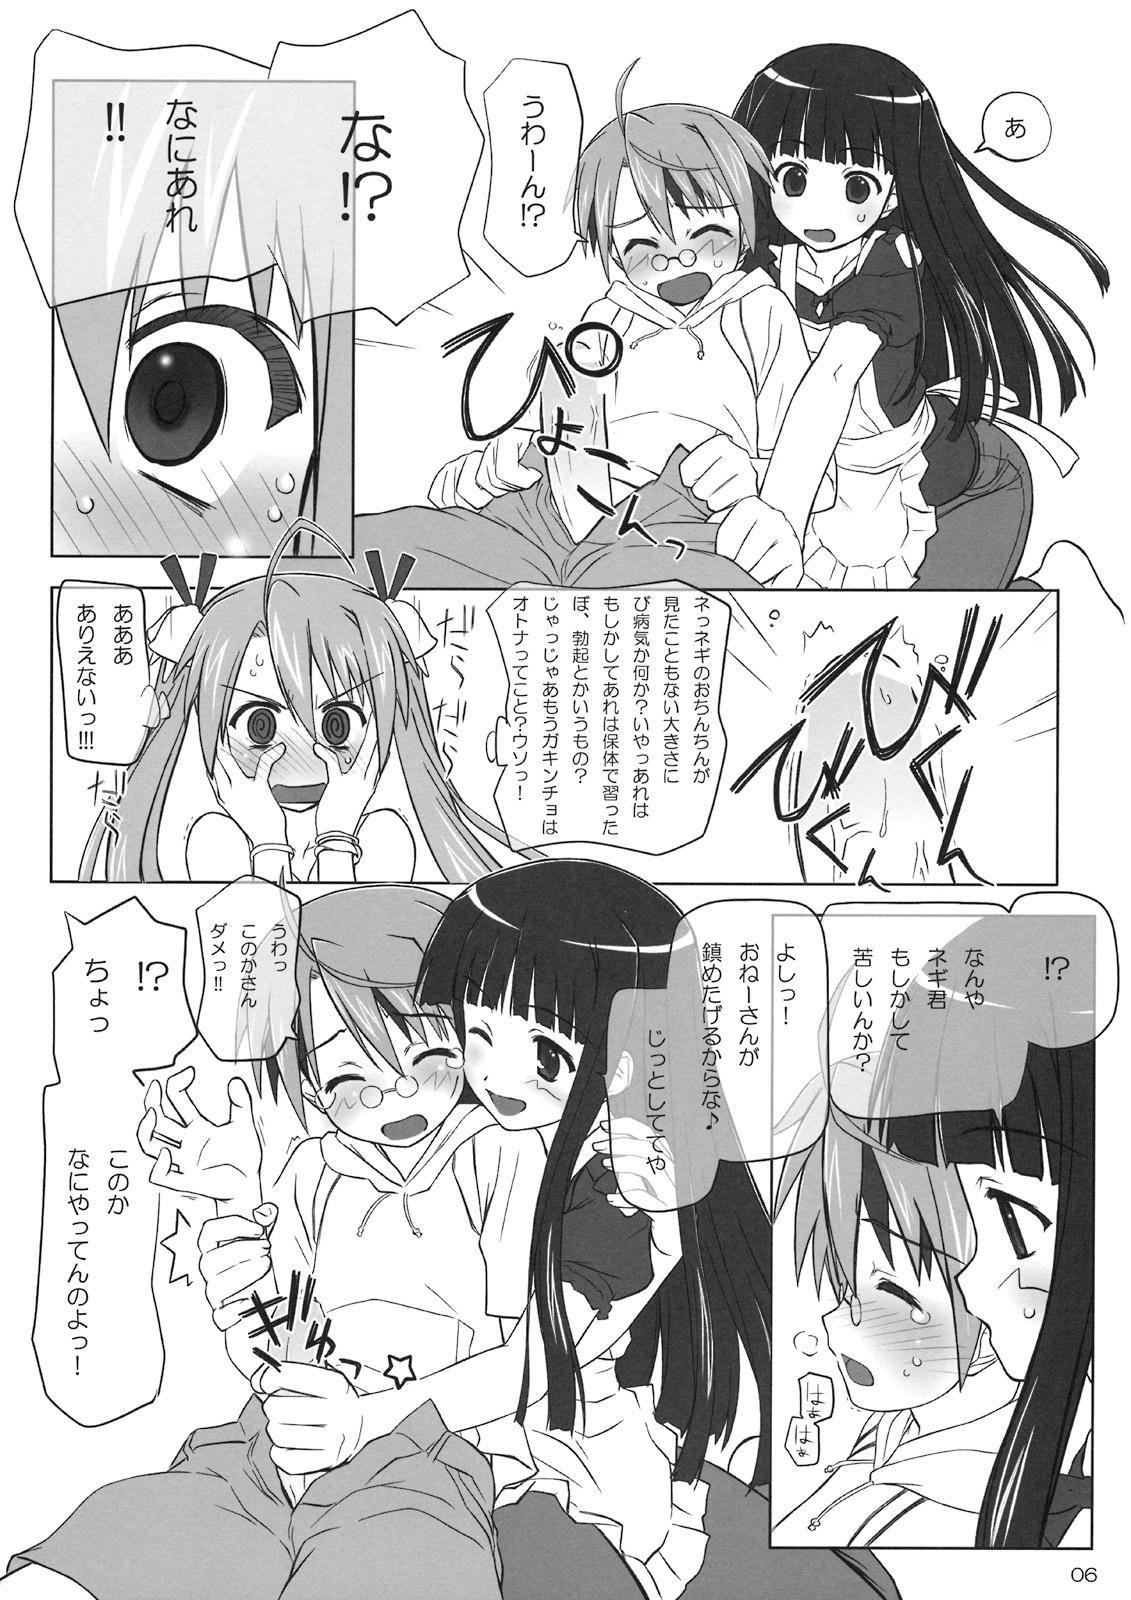 Fisting Dear My Little Witches 2nd - Mahou sensei negima Neighbor - Page 5